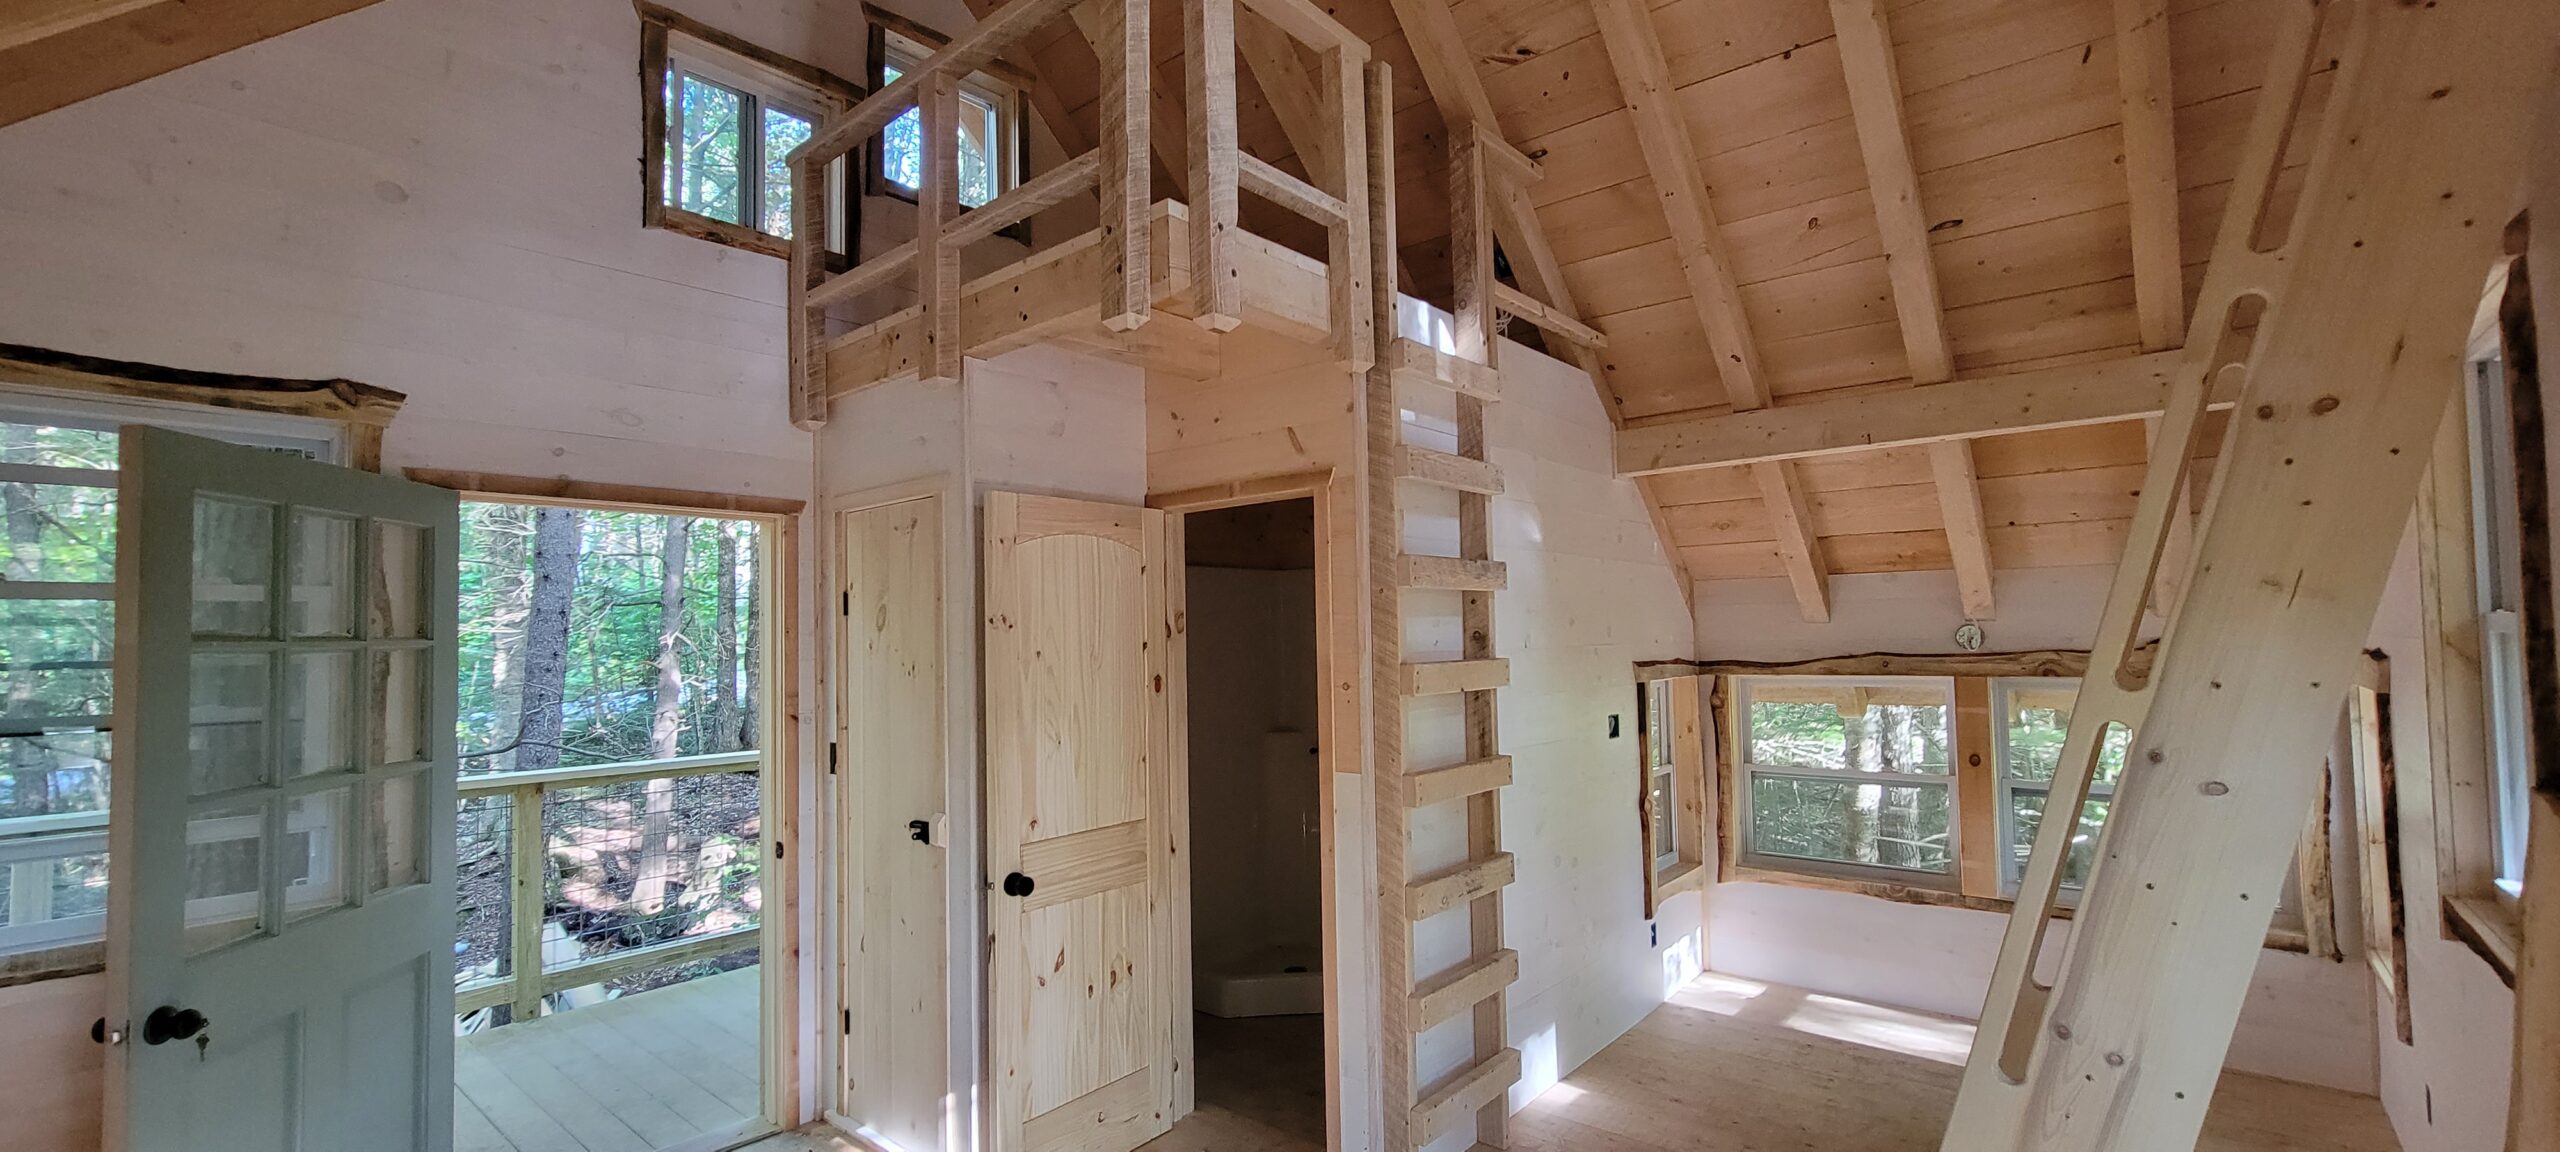 A secondary loft makes the perfect reading nook or second sleeping space in this treehouse rental.